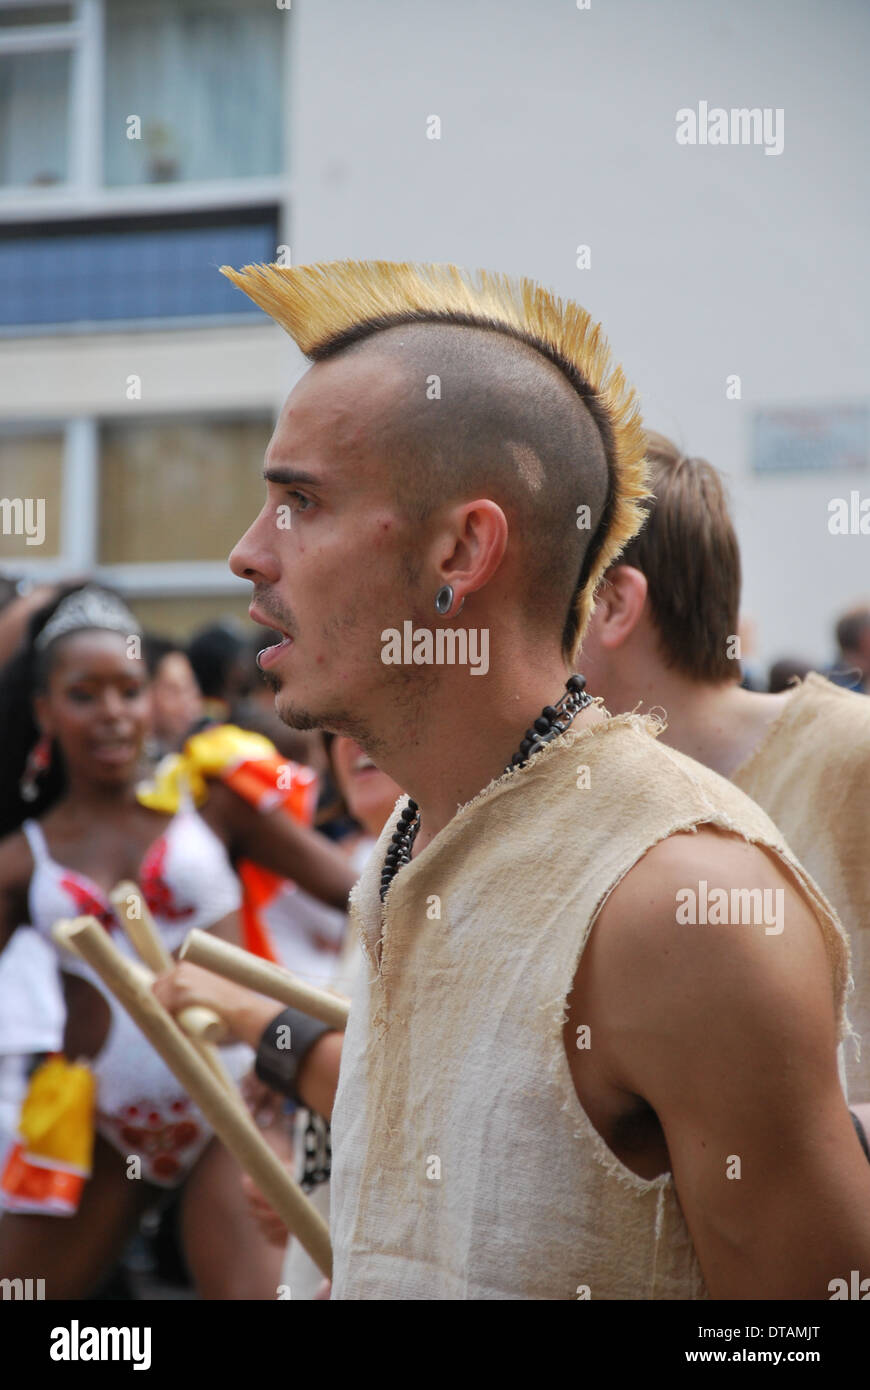 The Notting Hill Carnival Stock Photo